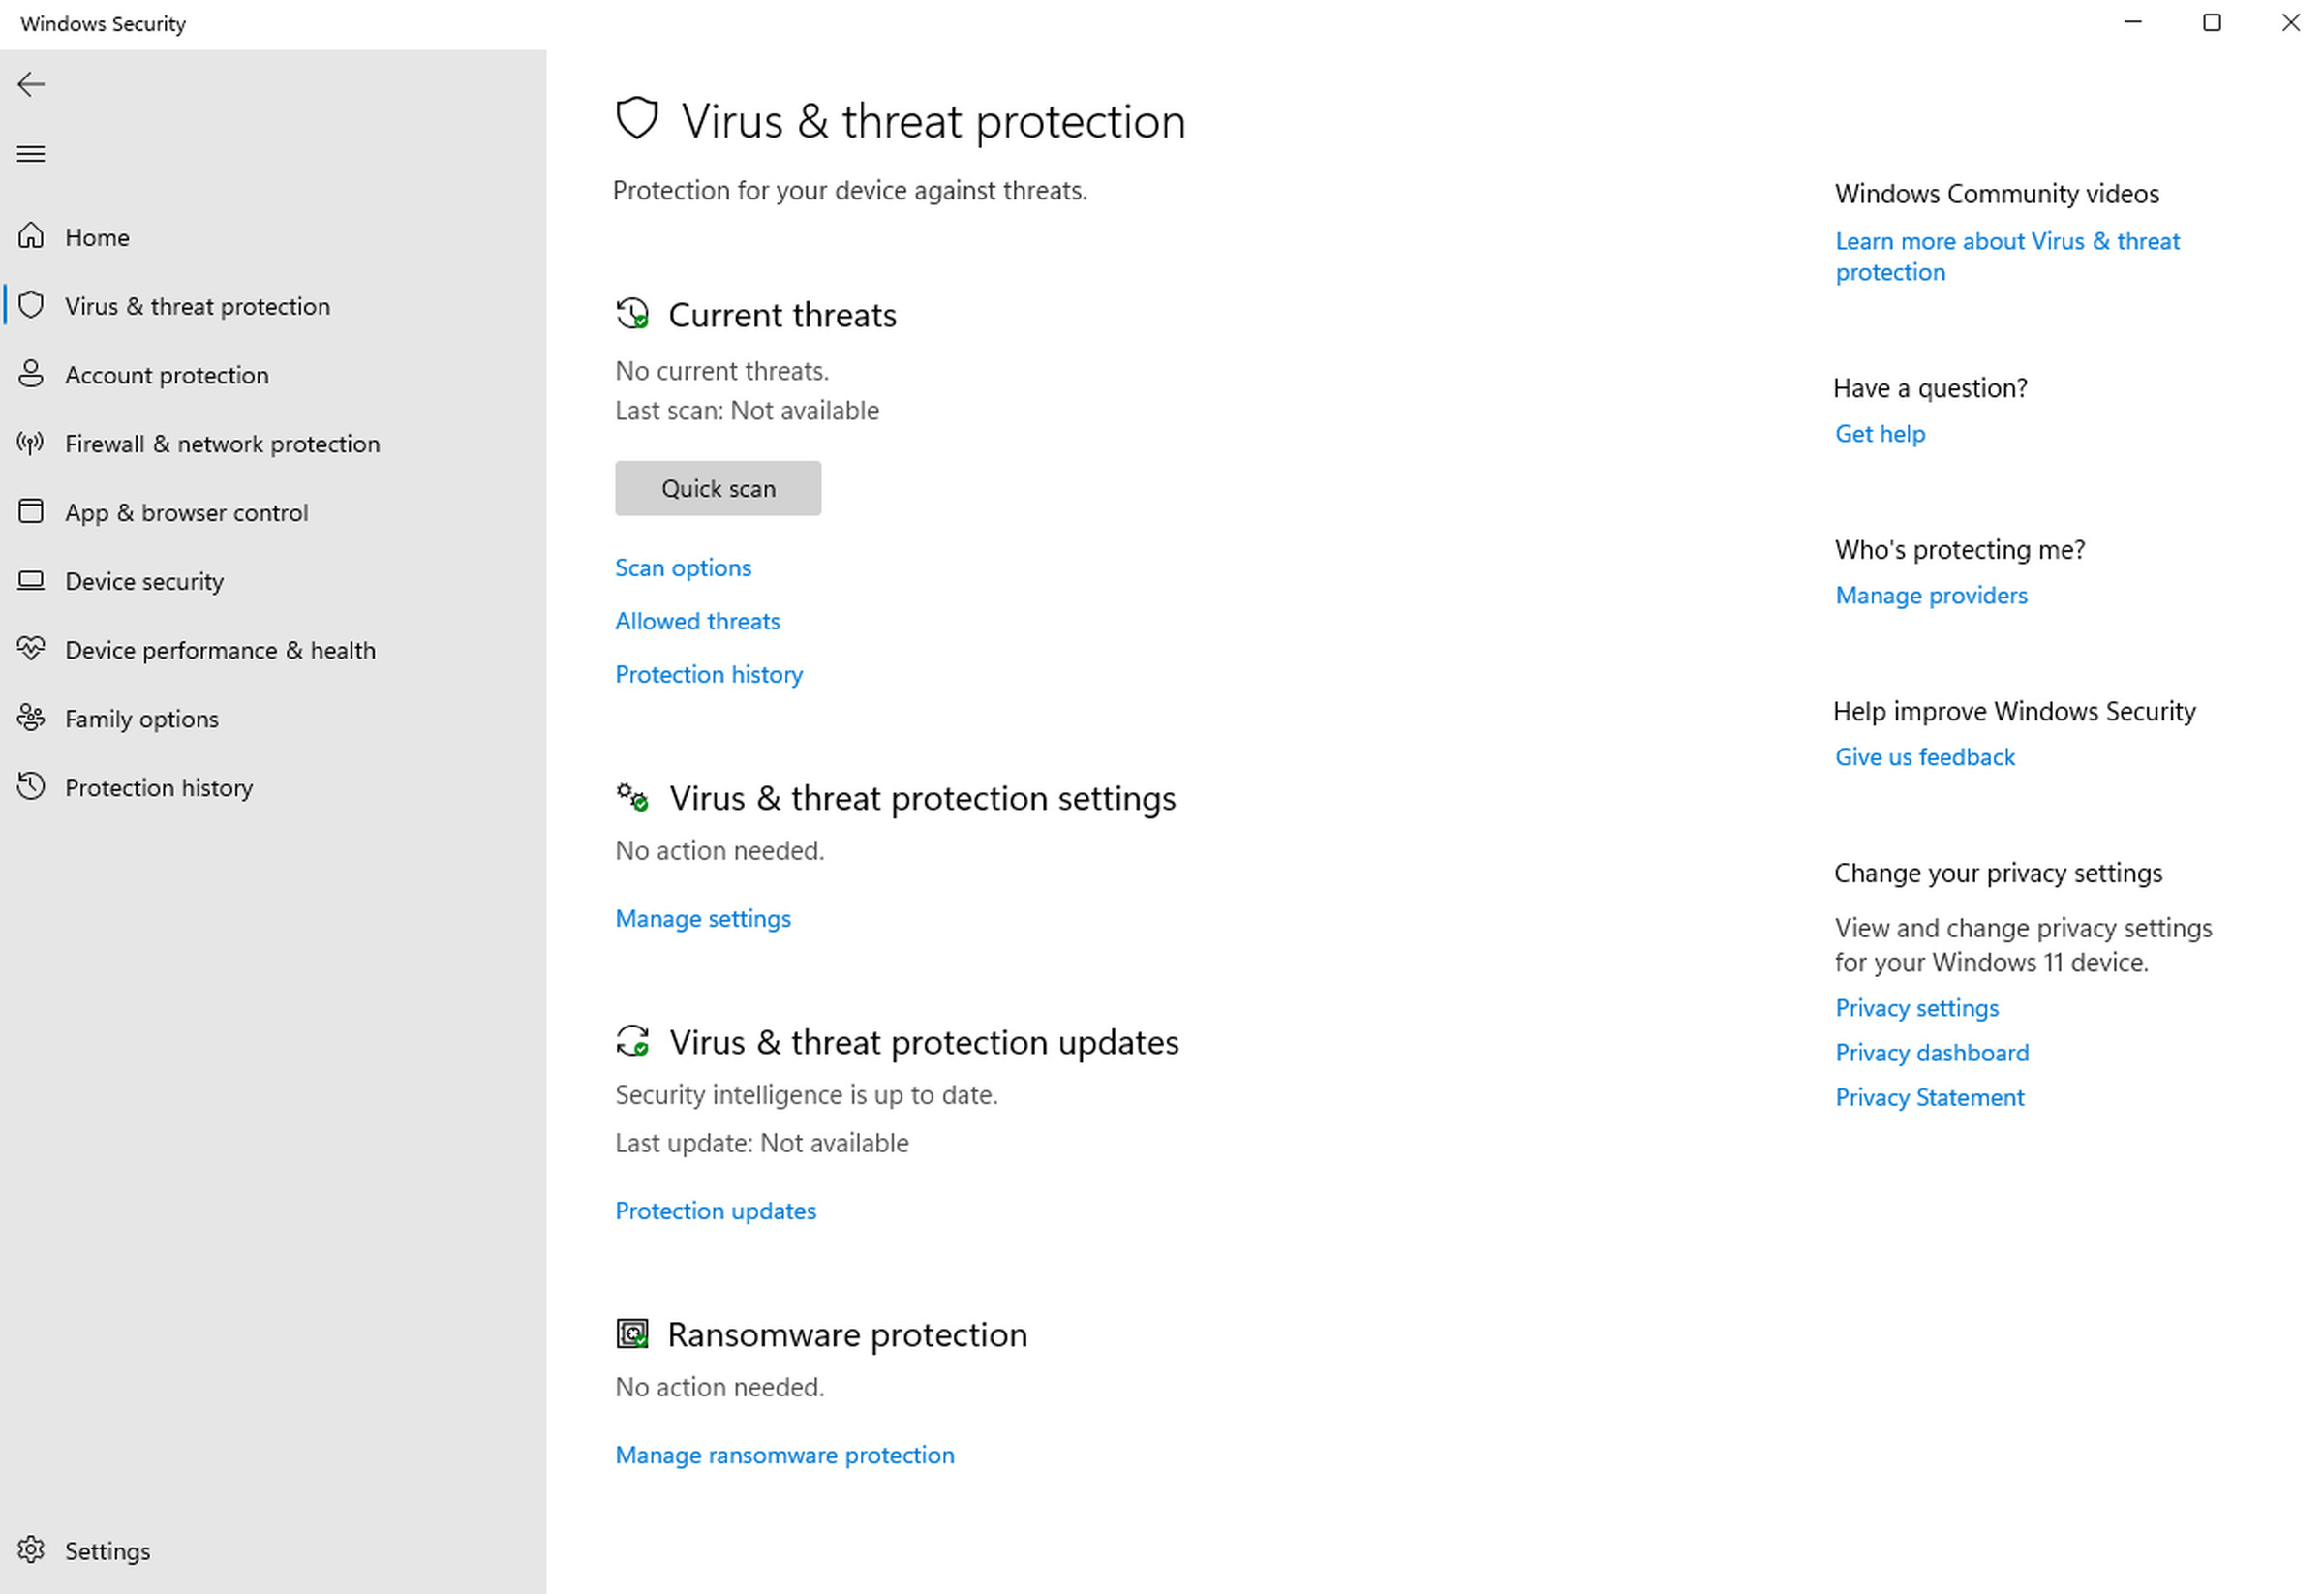 Windows Security’s built-in virus and threat protection feature.